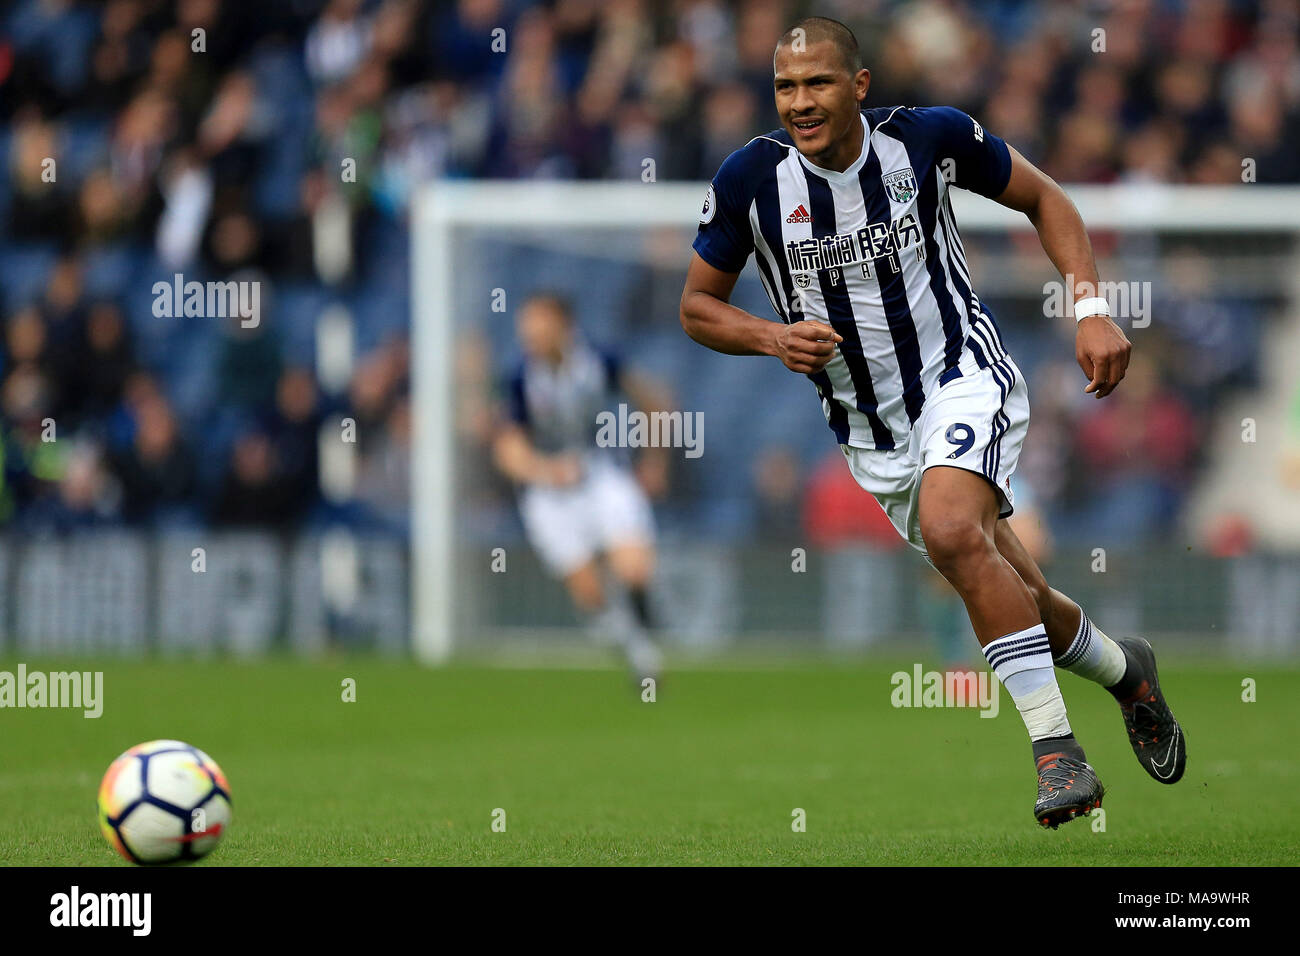 West Bromwich , UK, 31 Mar 2018. Jose Salomon Rondon of West Bromwich  Albion in action. Premier League match, West Bromwich Albion v Burnley at  the Hawthorns Stadium in West Bromwich on